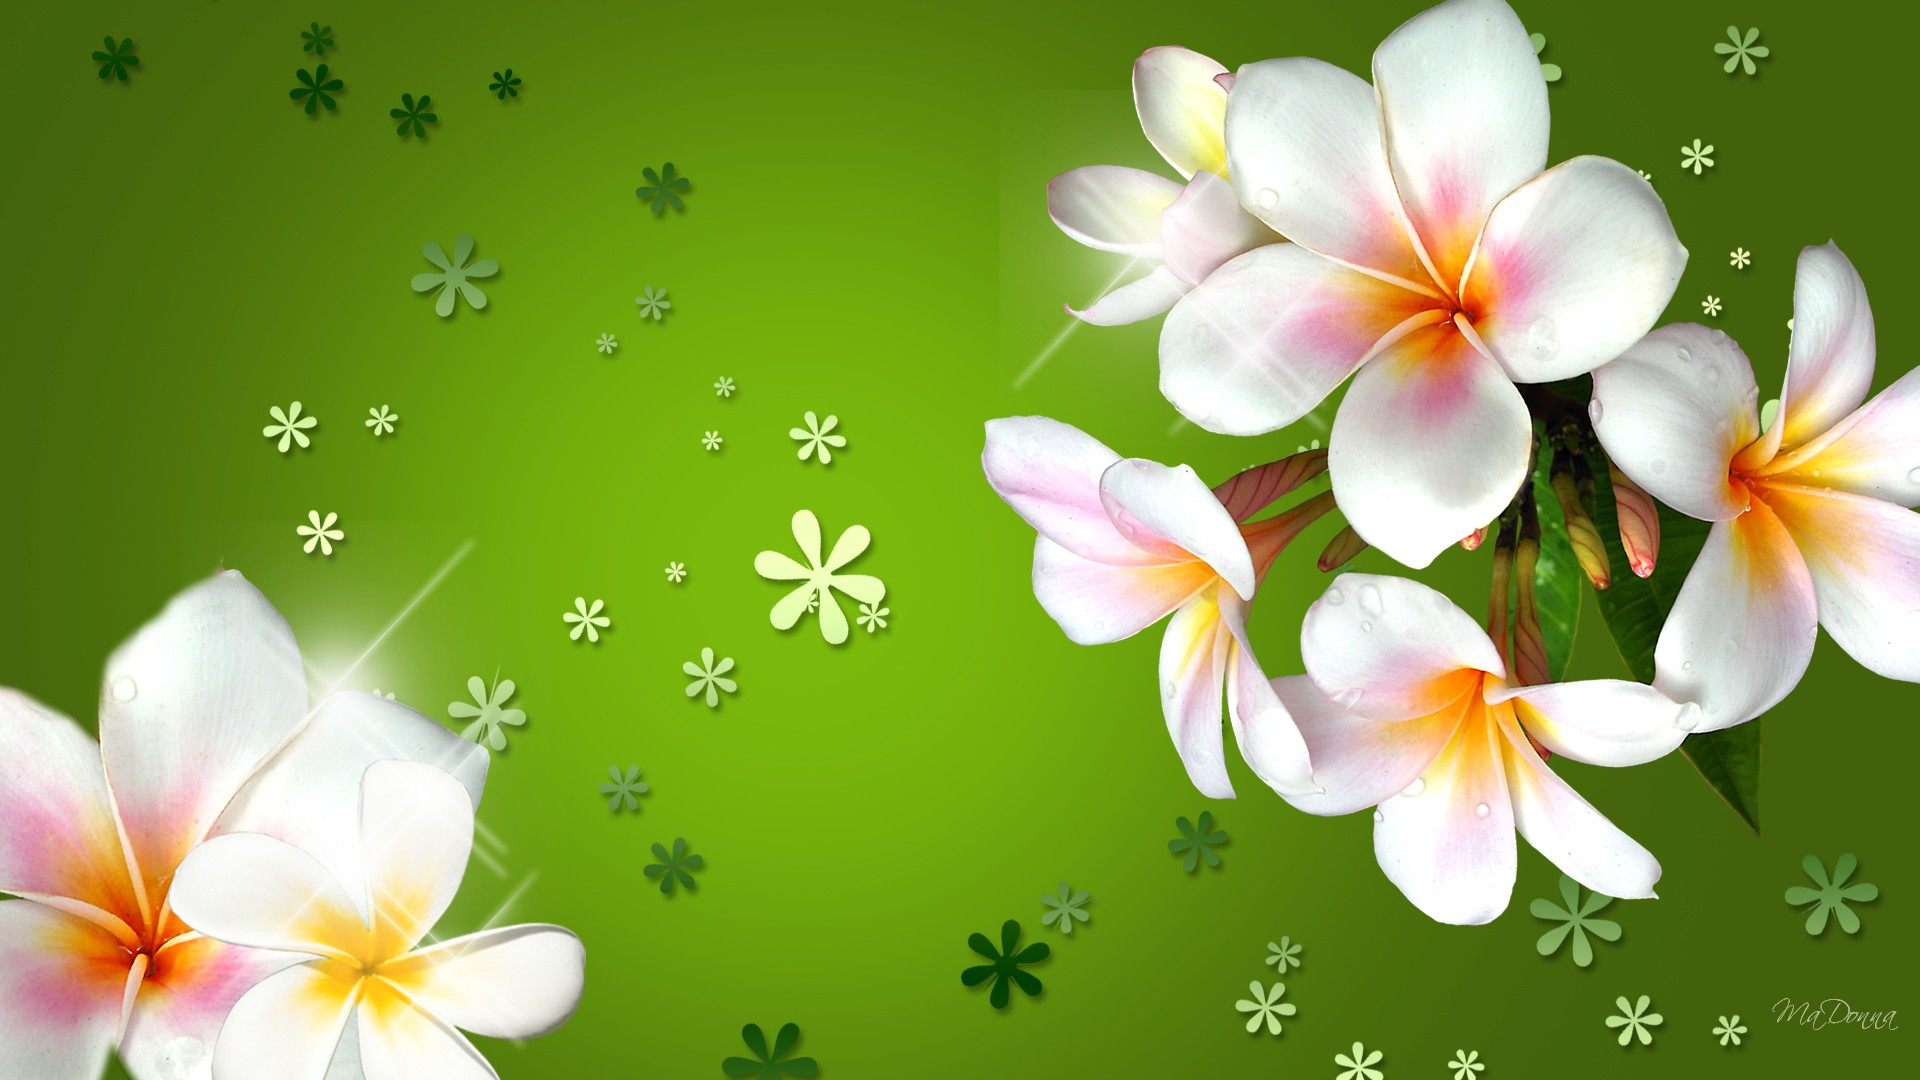 Download Beautiful Flowers Wallpaper Photos Pictures Hd Widescreen ...